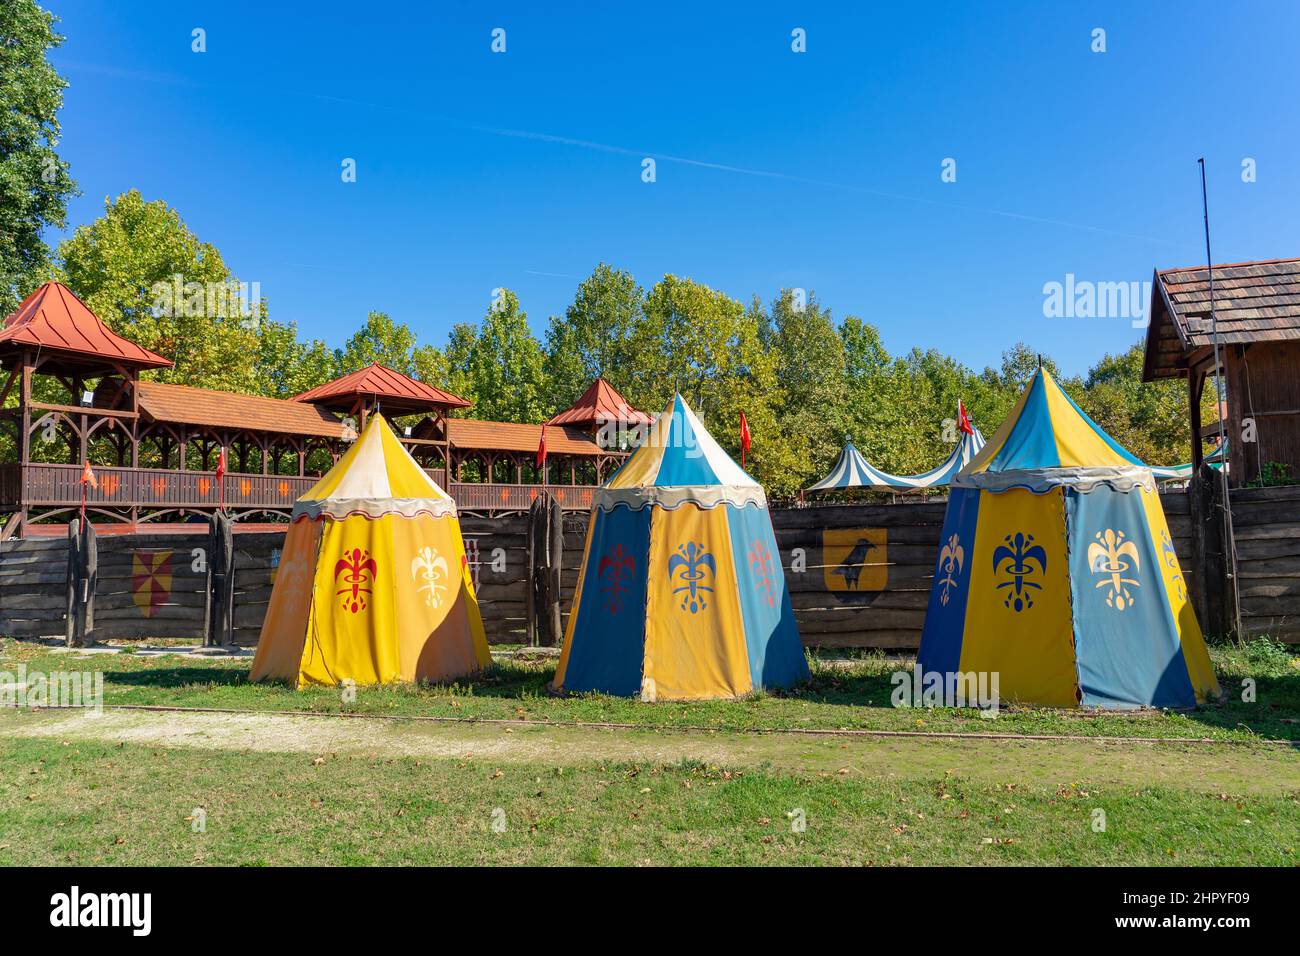 Colorful medieval knight age tents in sumeg castle knight game joust decoration Stock Photo